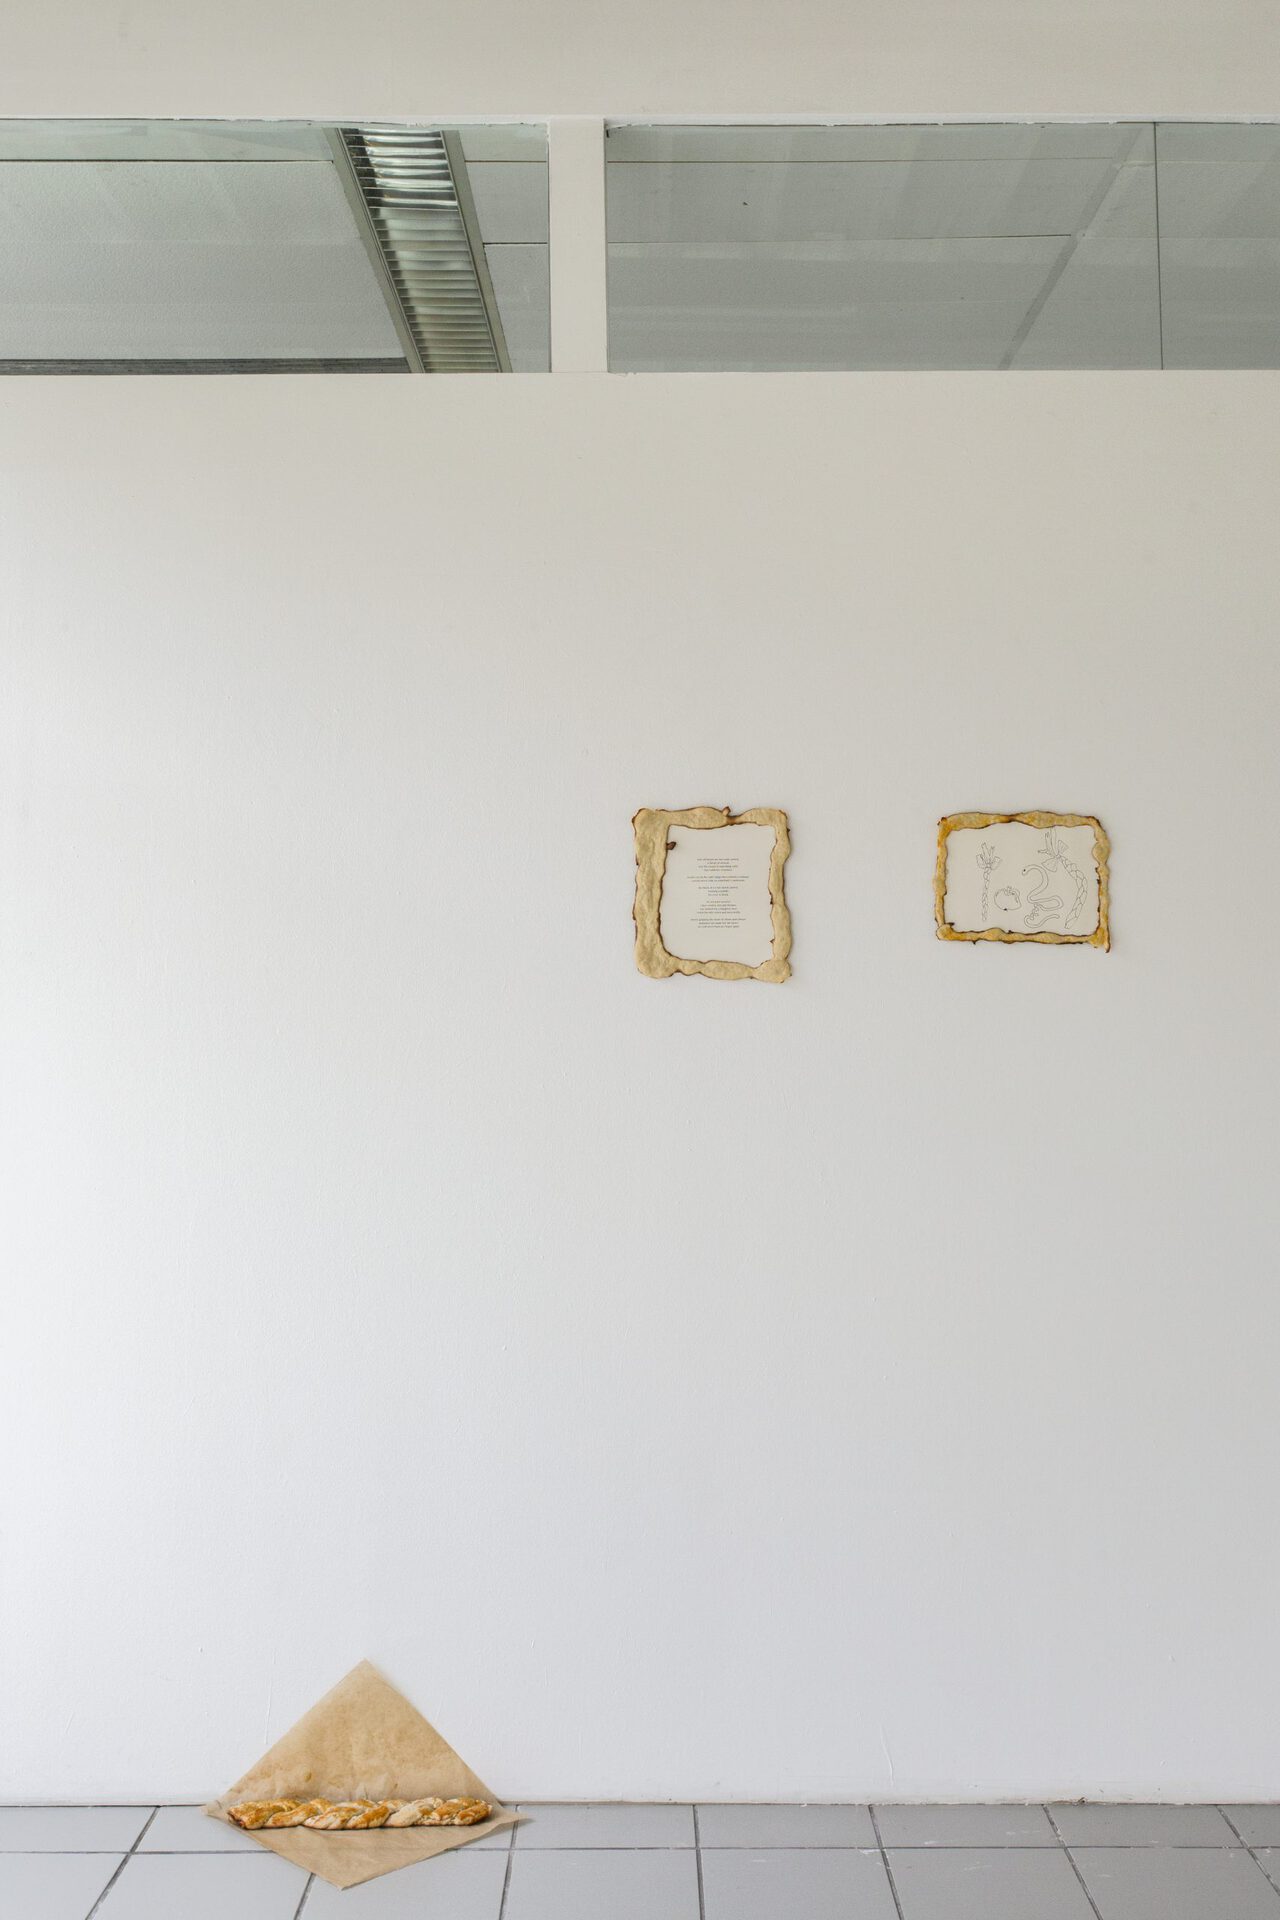 Anna Regner, A place to(o) gorge(ous), 2020, 5 drawings & bread, variable dimensions